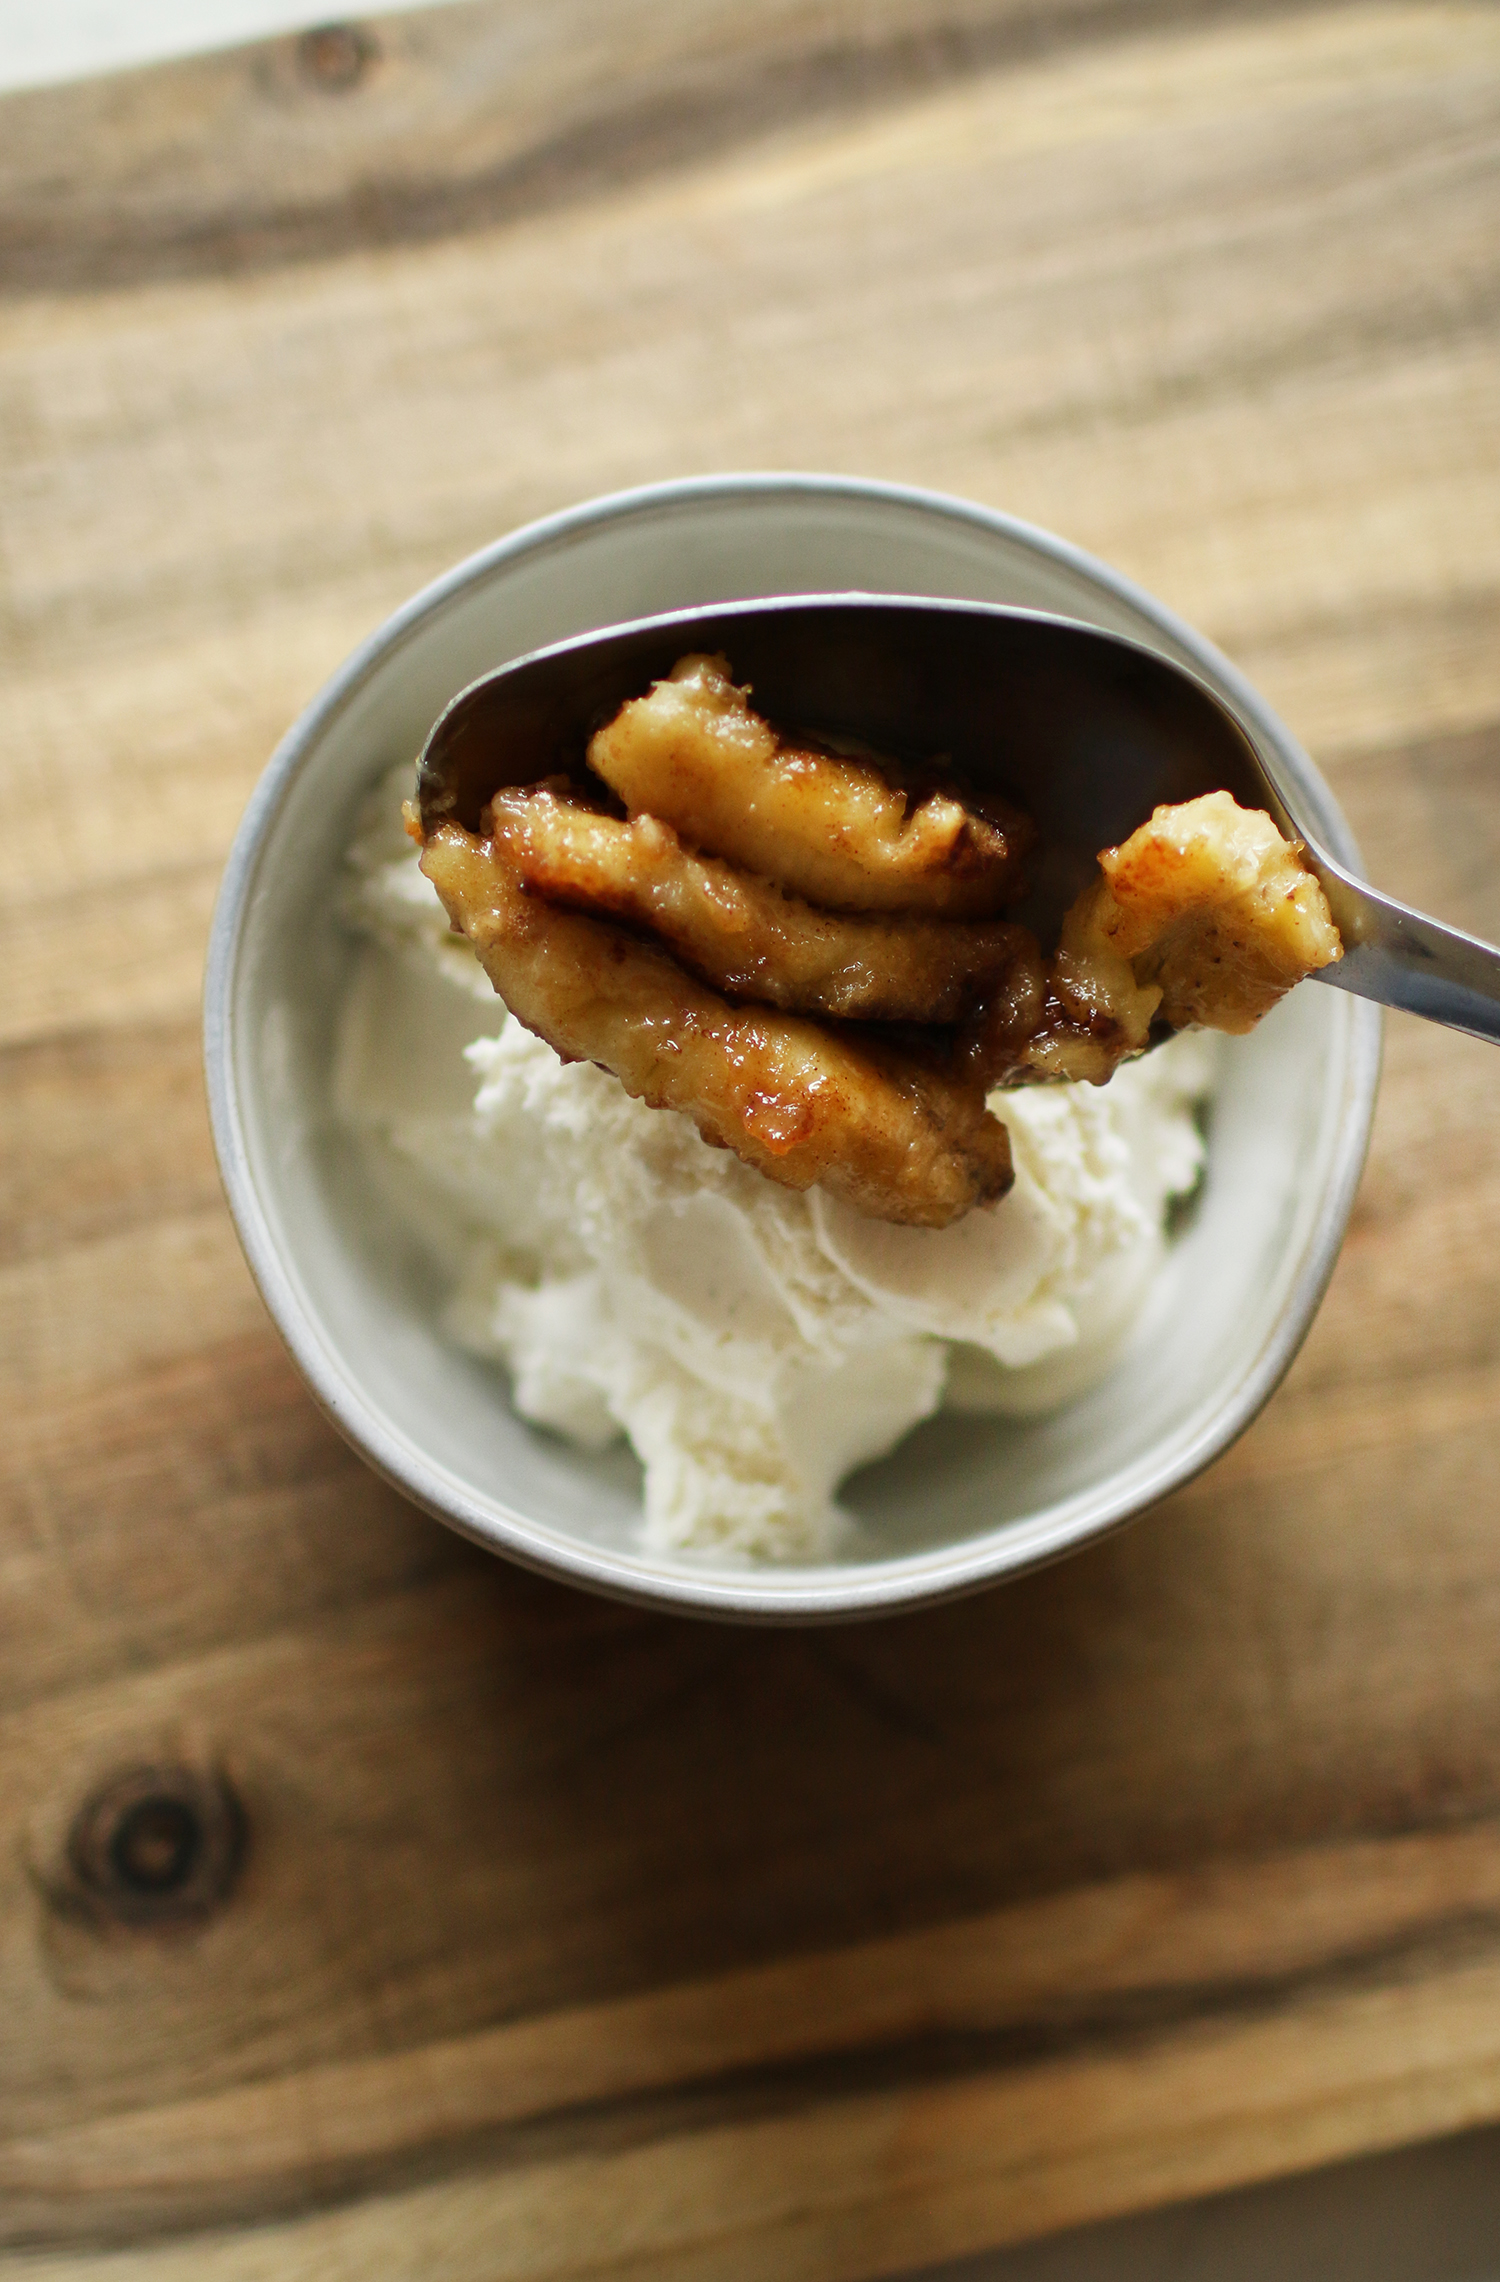 Our family loves fried bananas and ice cream for a delicious and easy summer dessert. The mix of brown sugar, butter, cinnamon, and hot banana pairs so well with cold vanilla bean ice cream. Catch the whole recipe on KaraLayne.com!